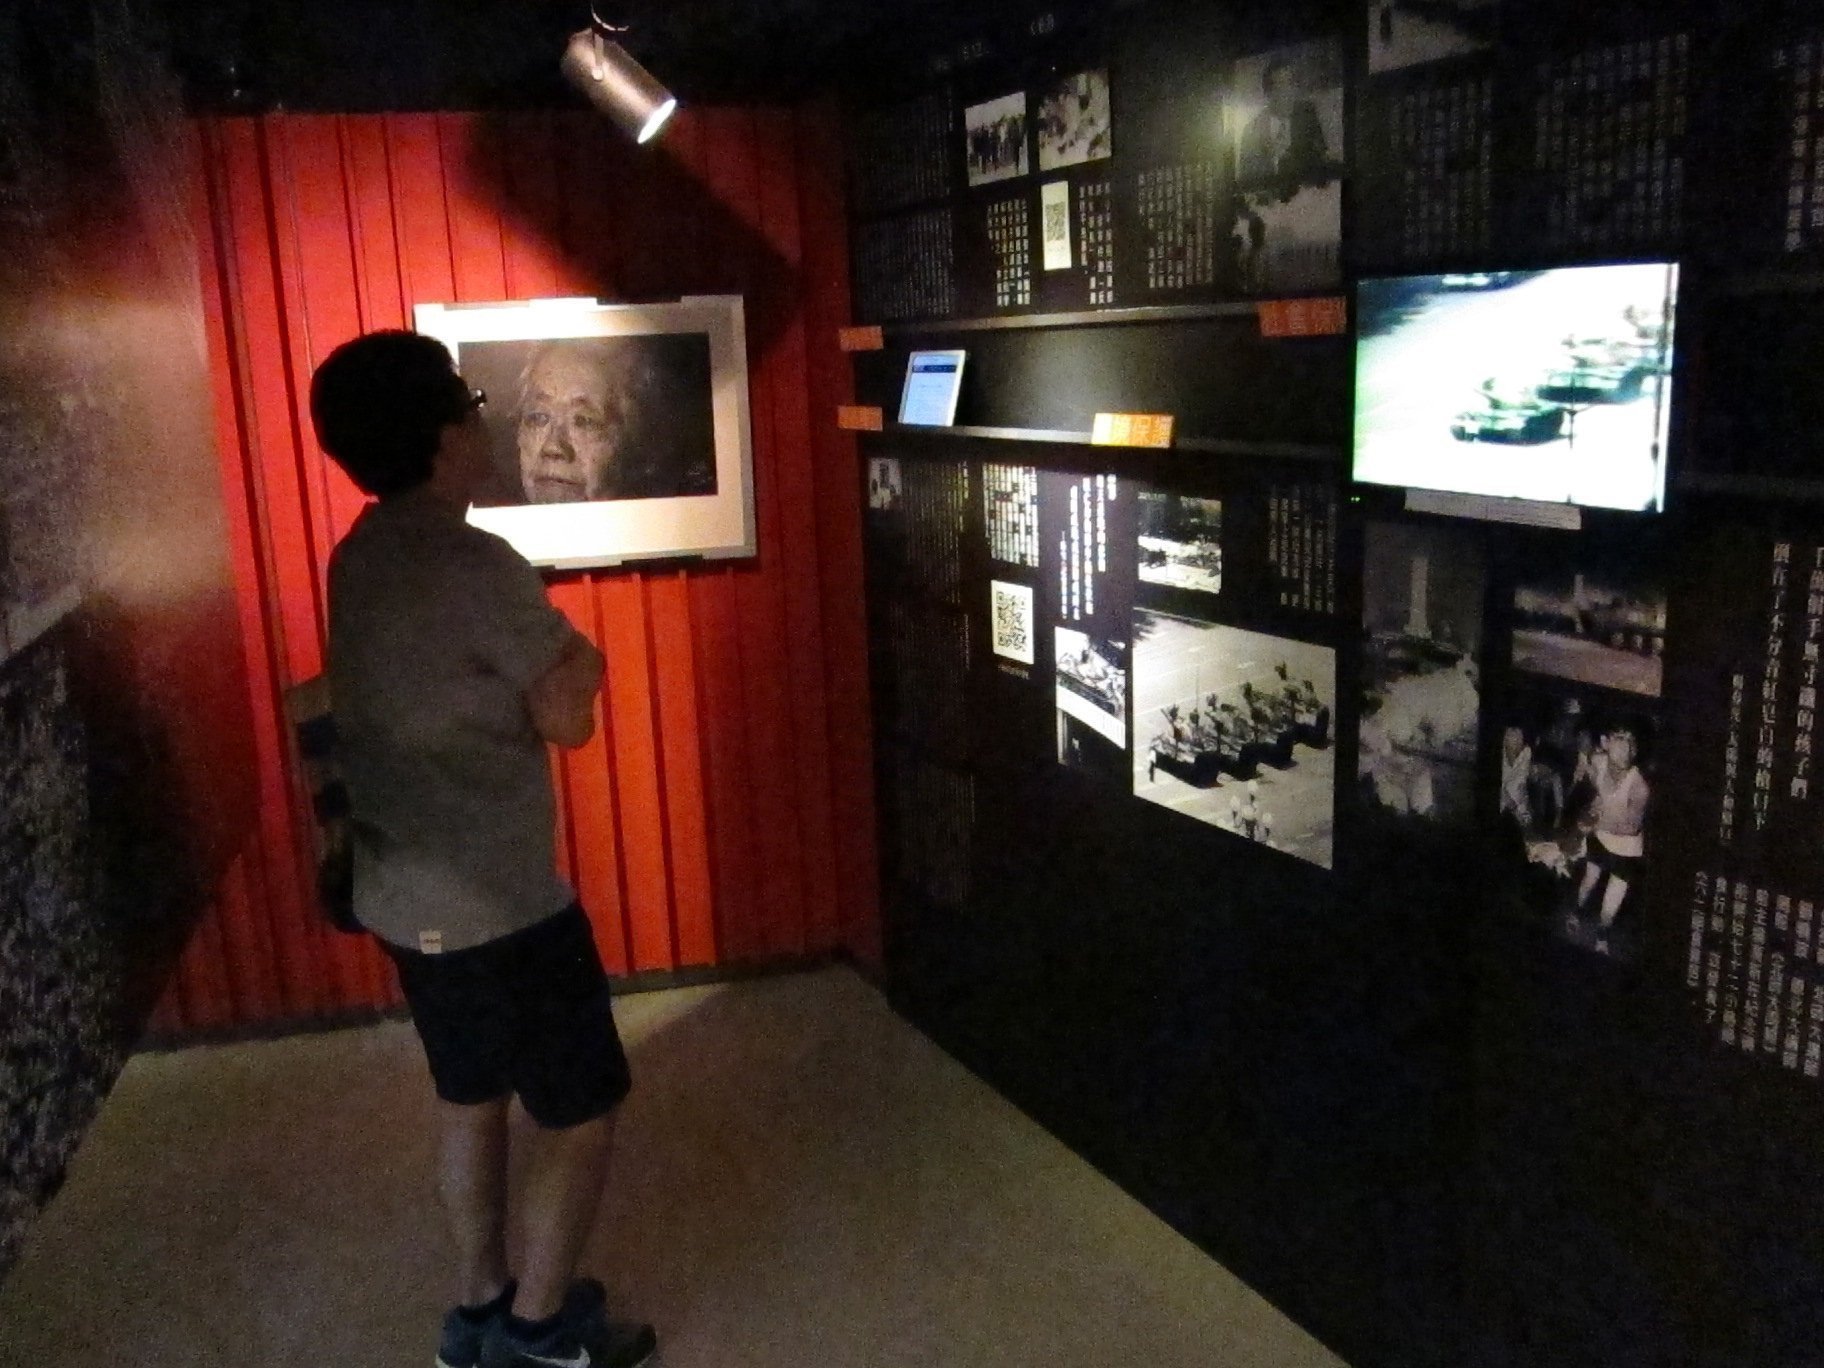 A visitor to the June 4 Memorial Hall in Hong Kong watches a video of Chinese tanks rolling into Beijing's Tiananman Square during the 1989 crackdown on pro-democracy protesters on May 23, 2014 (MCT/Getty Images)